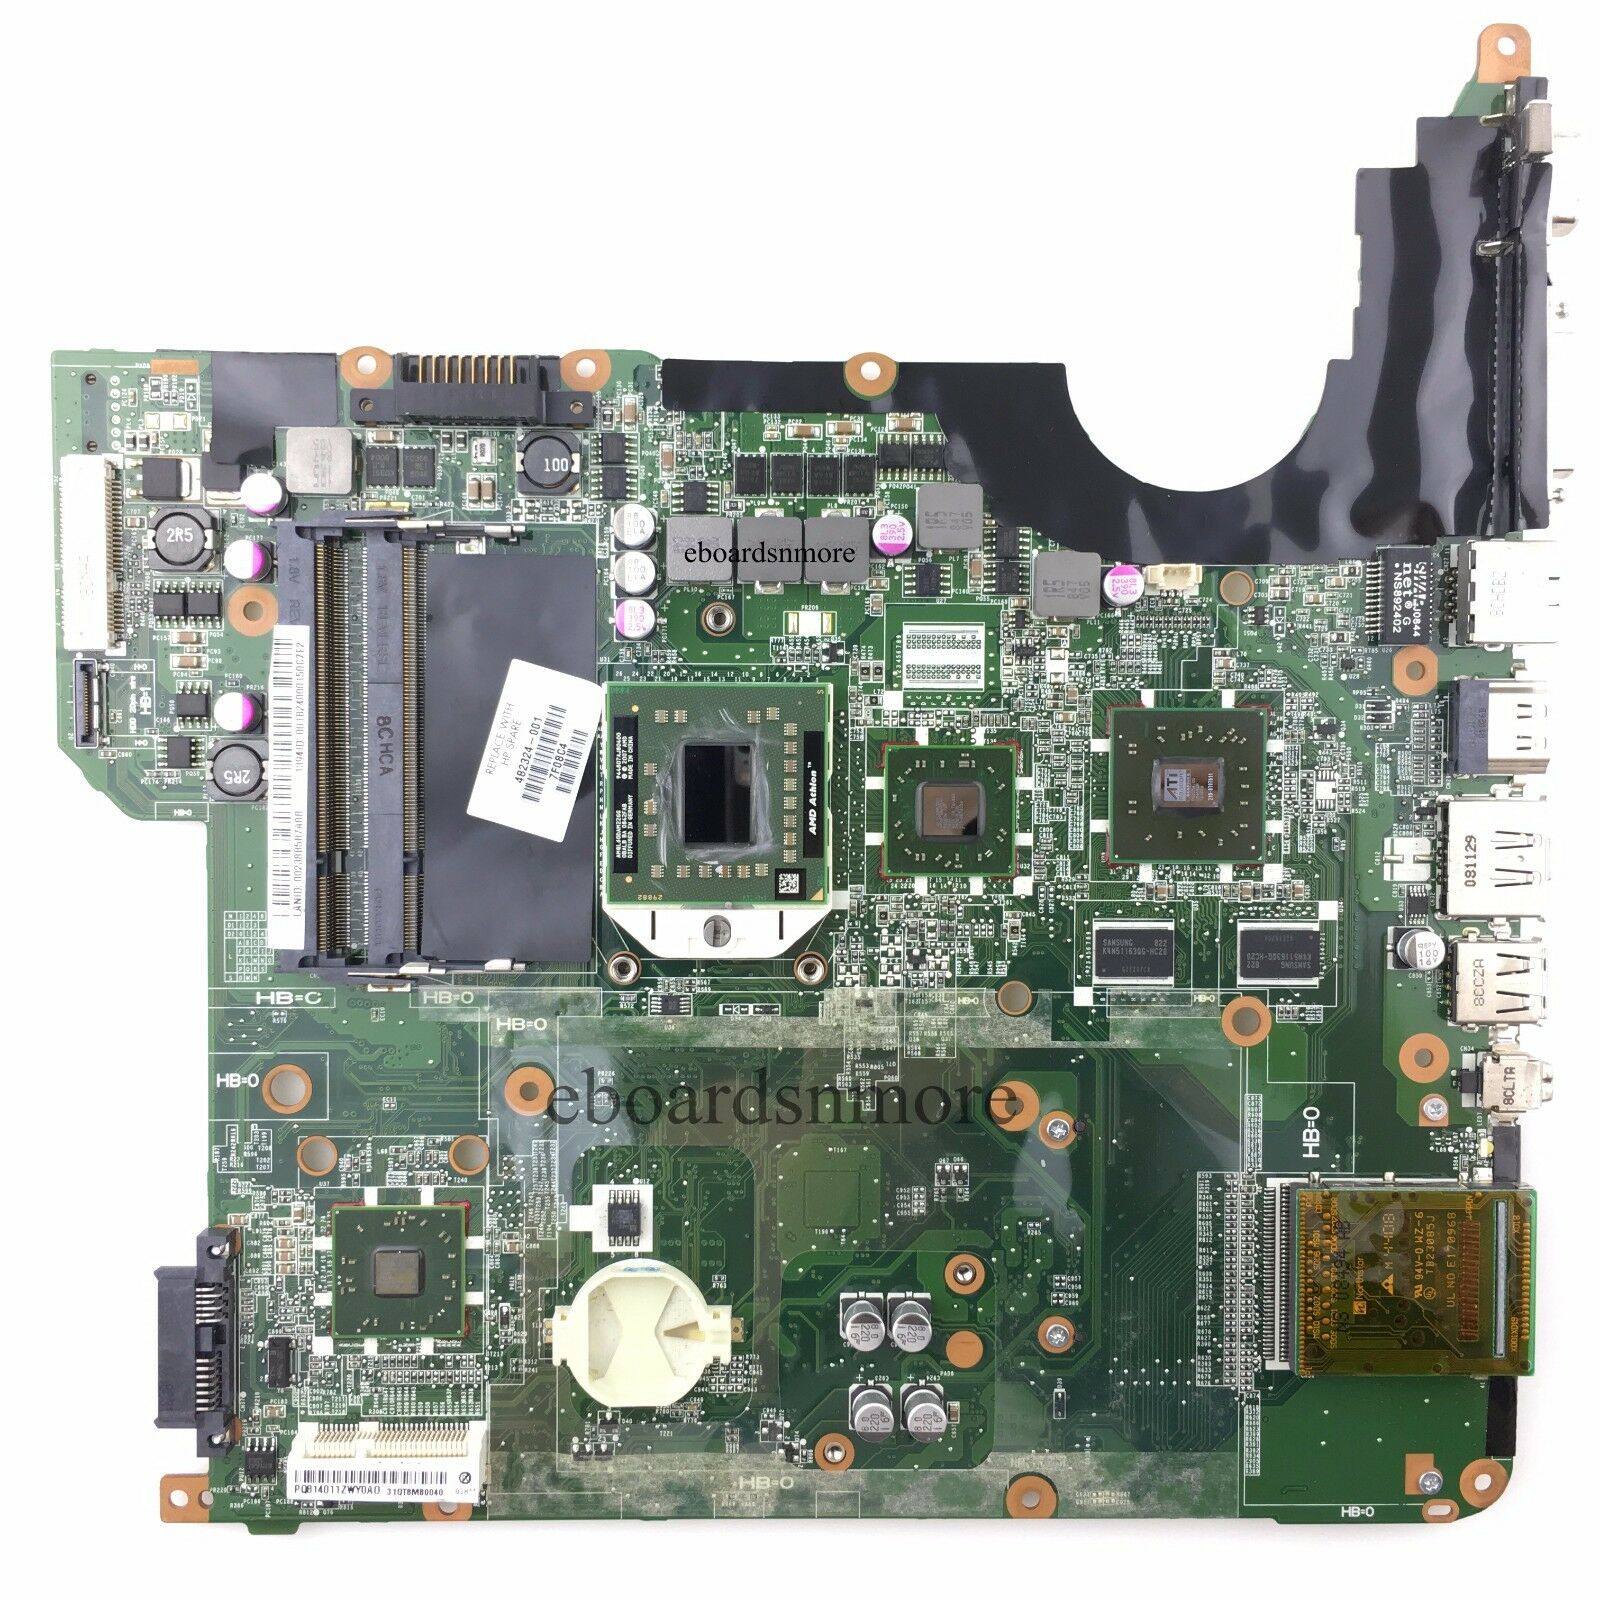 482324-001 AMD motherboard for HP DV5-1000 Laptops, ATI graphics Compatible CPU Brand: AMD Number of Memory - Click Image to Close